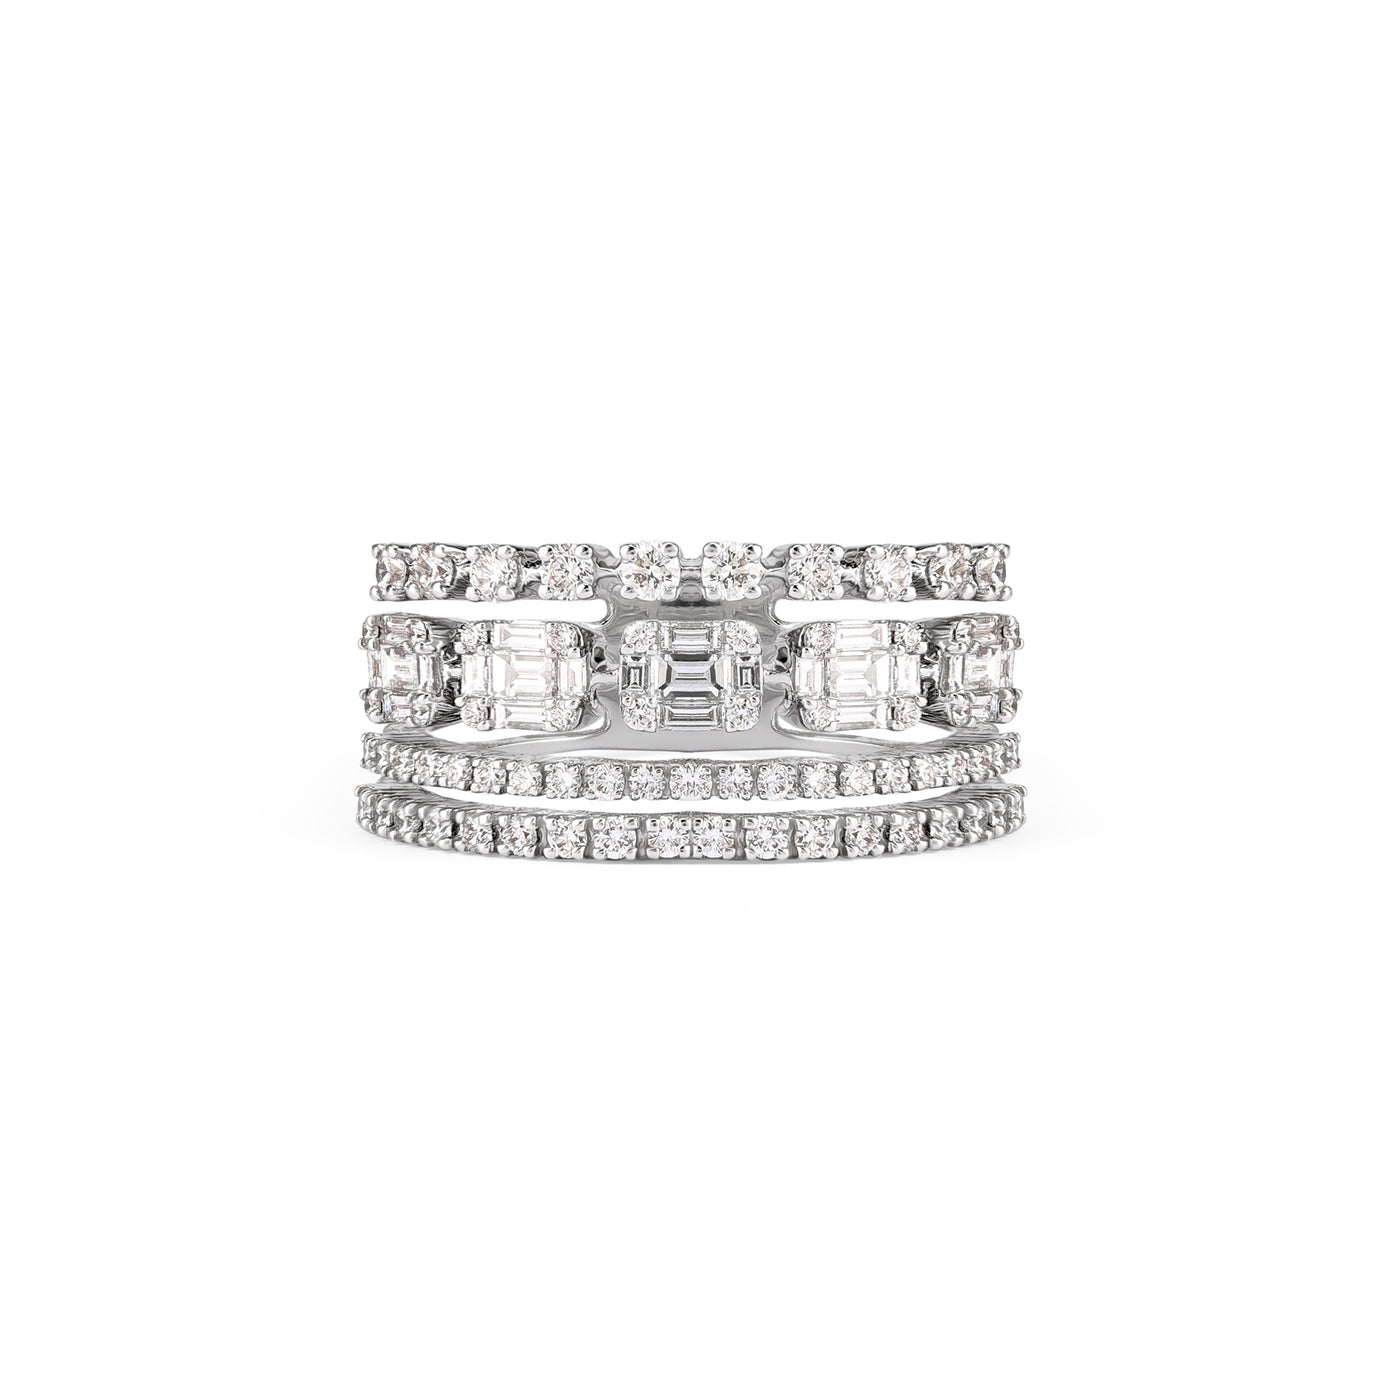 Soit Belle White Gold Layers Diamond Ring: Elegance in Layers